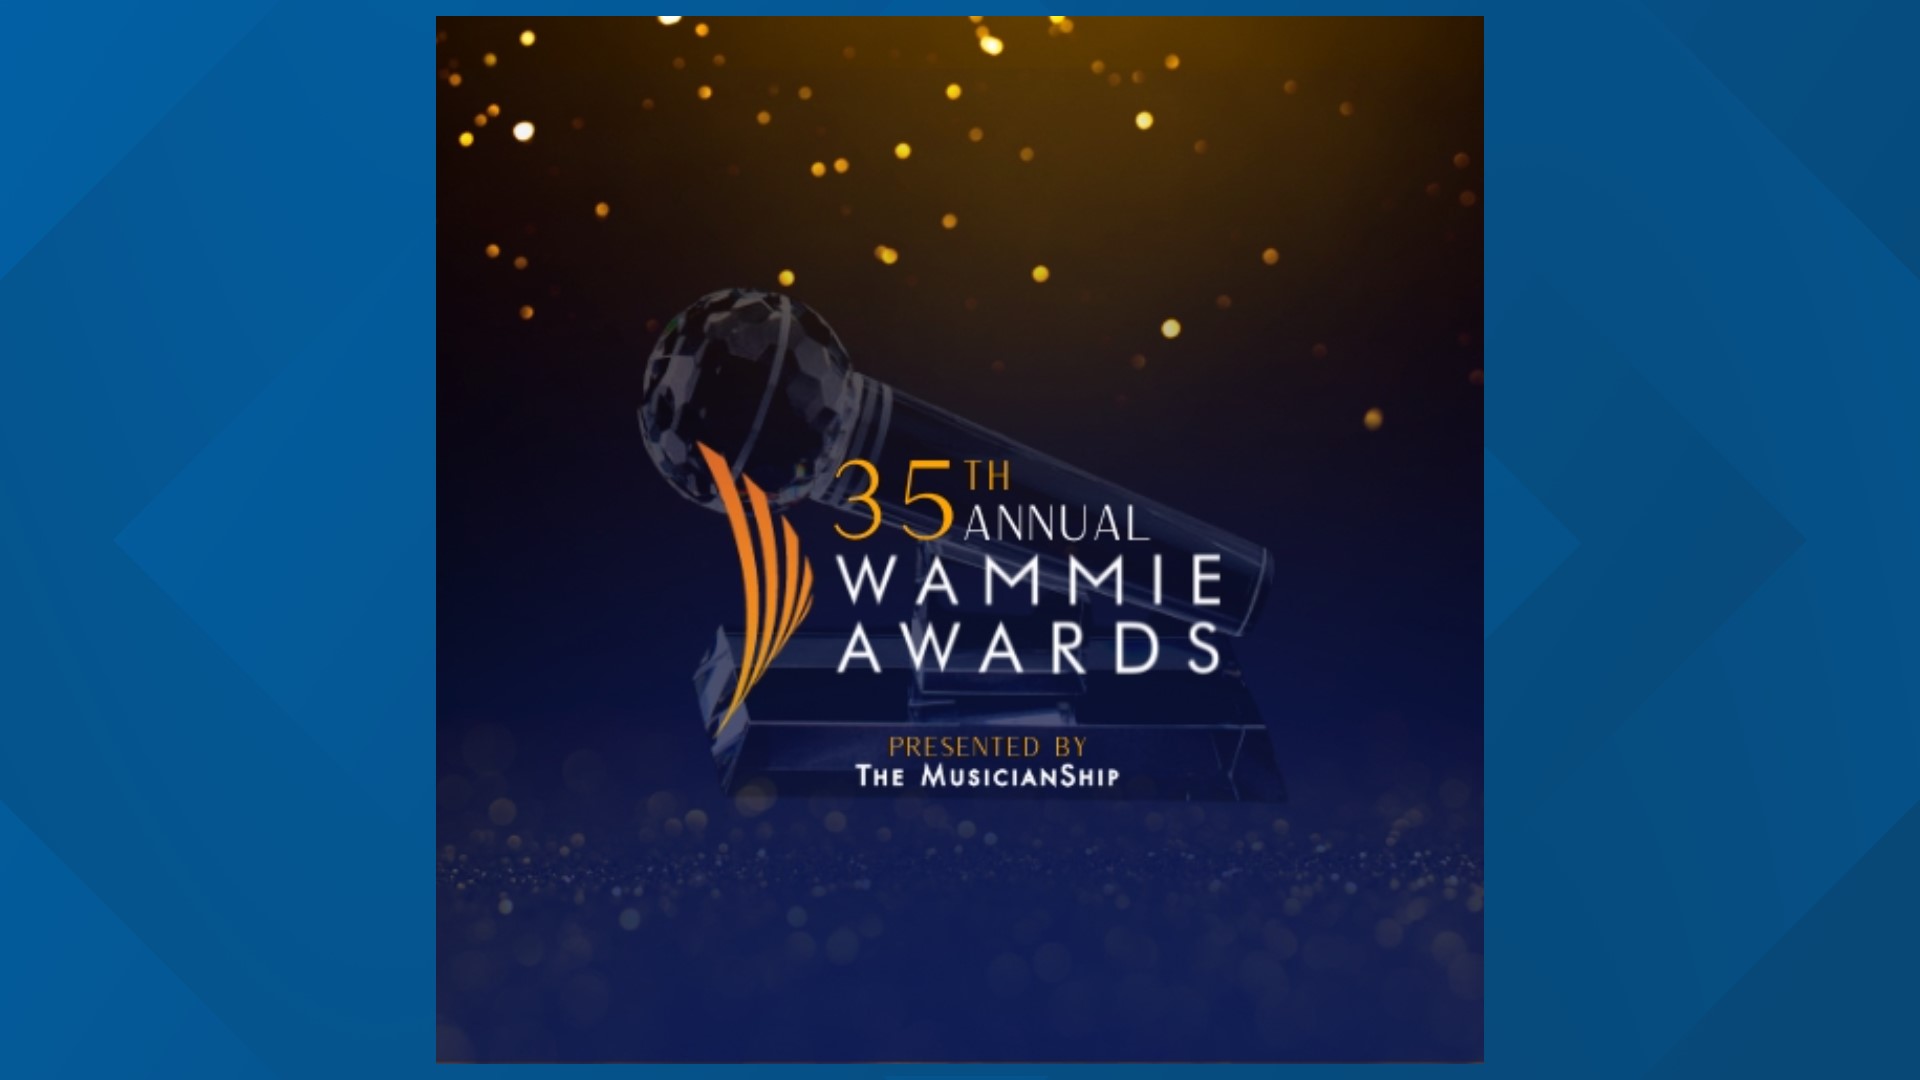 Ariel Davis and Antone "Chooky" Caldwell from The MusicianShip share how the organization supports local, independent artists and chat about the 35th WAMMIE awards.